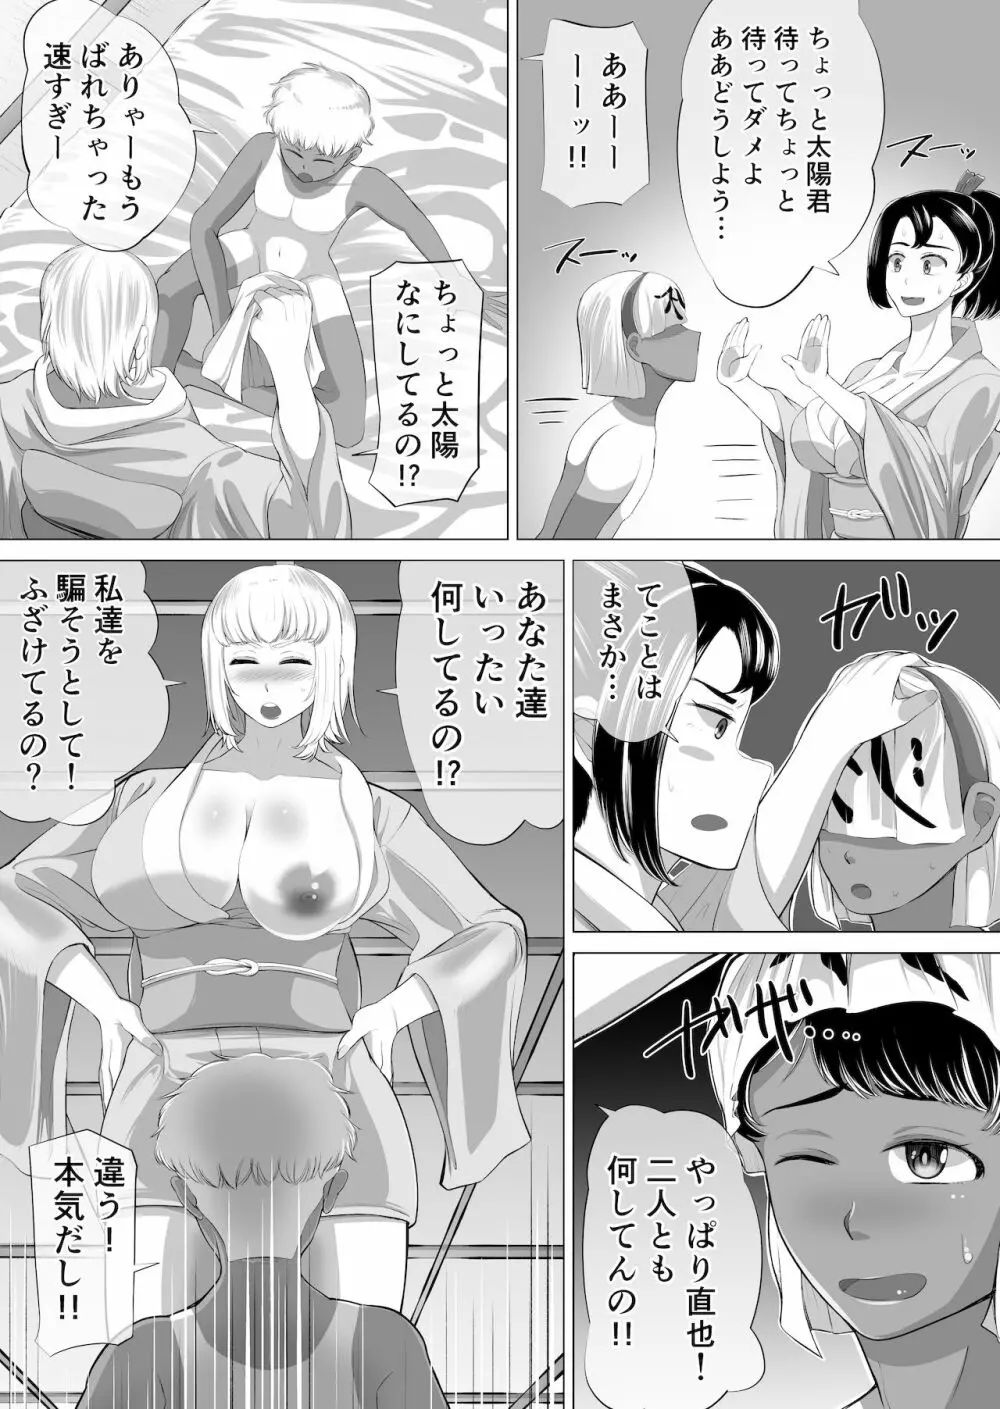 The 神孕村～やっくをやっつけろの巻～ Page.21